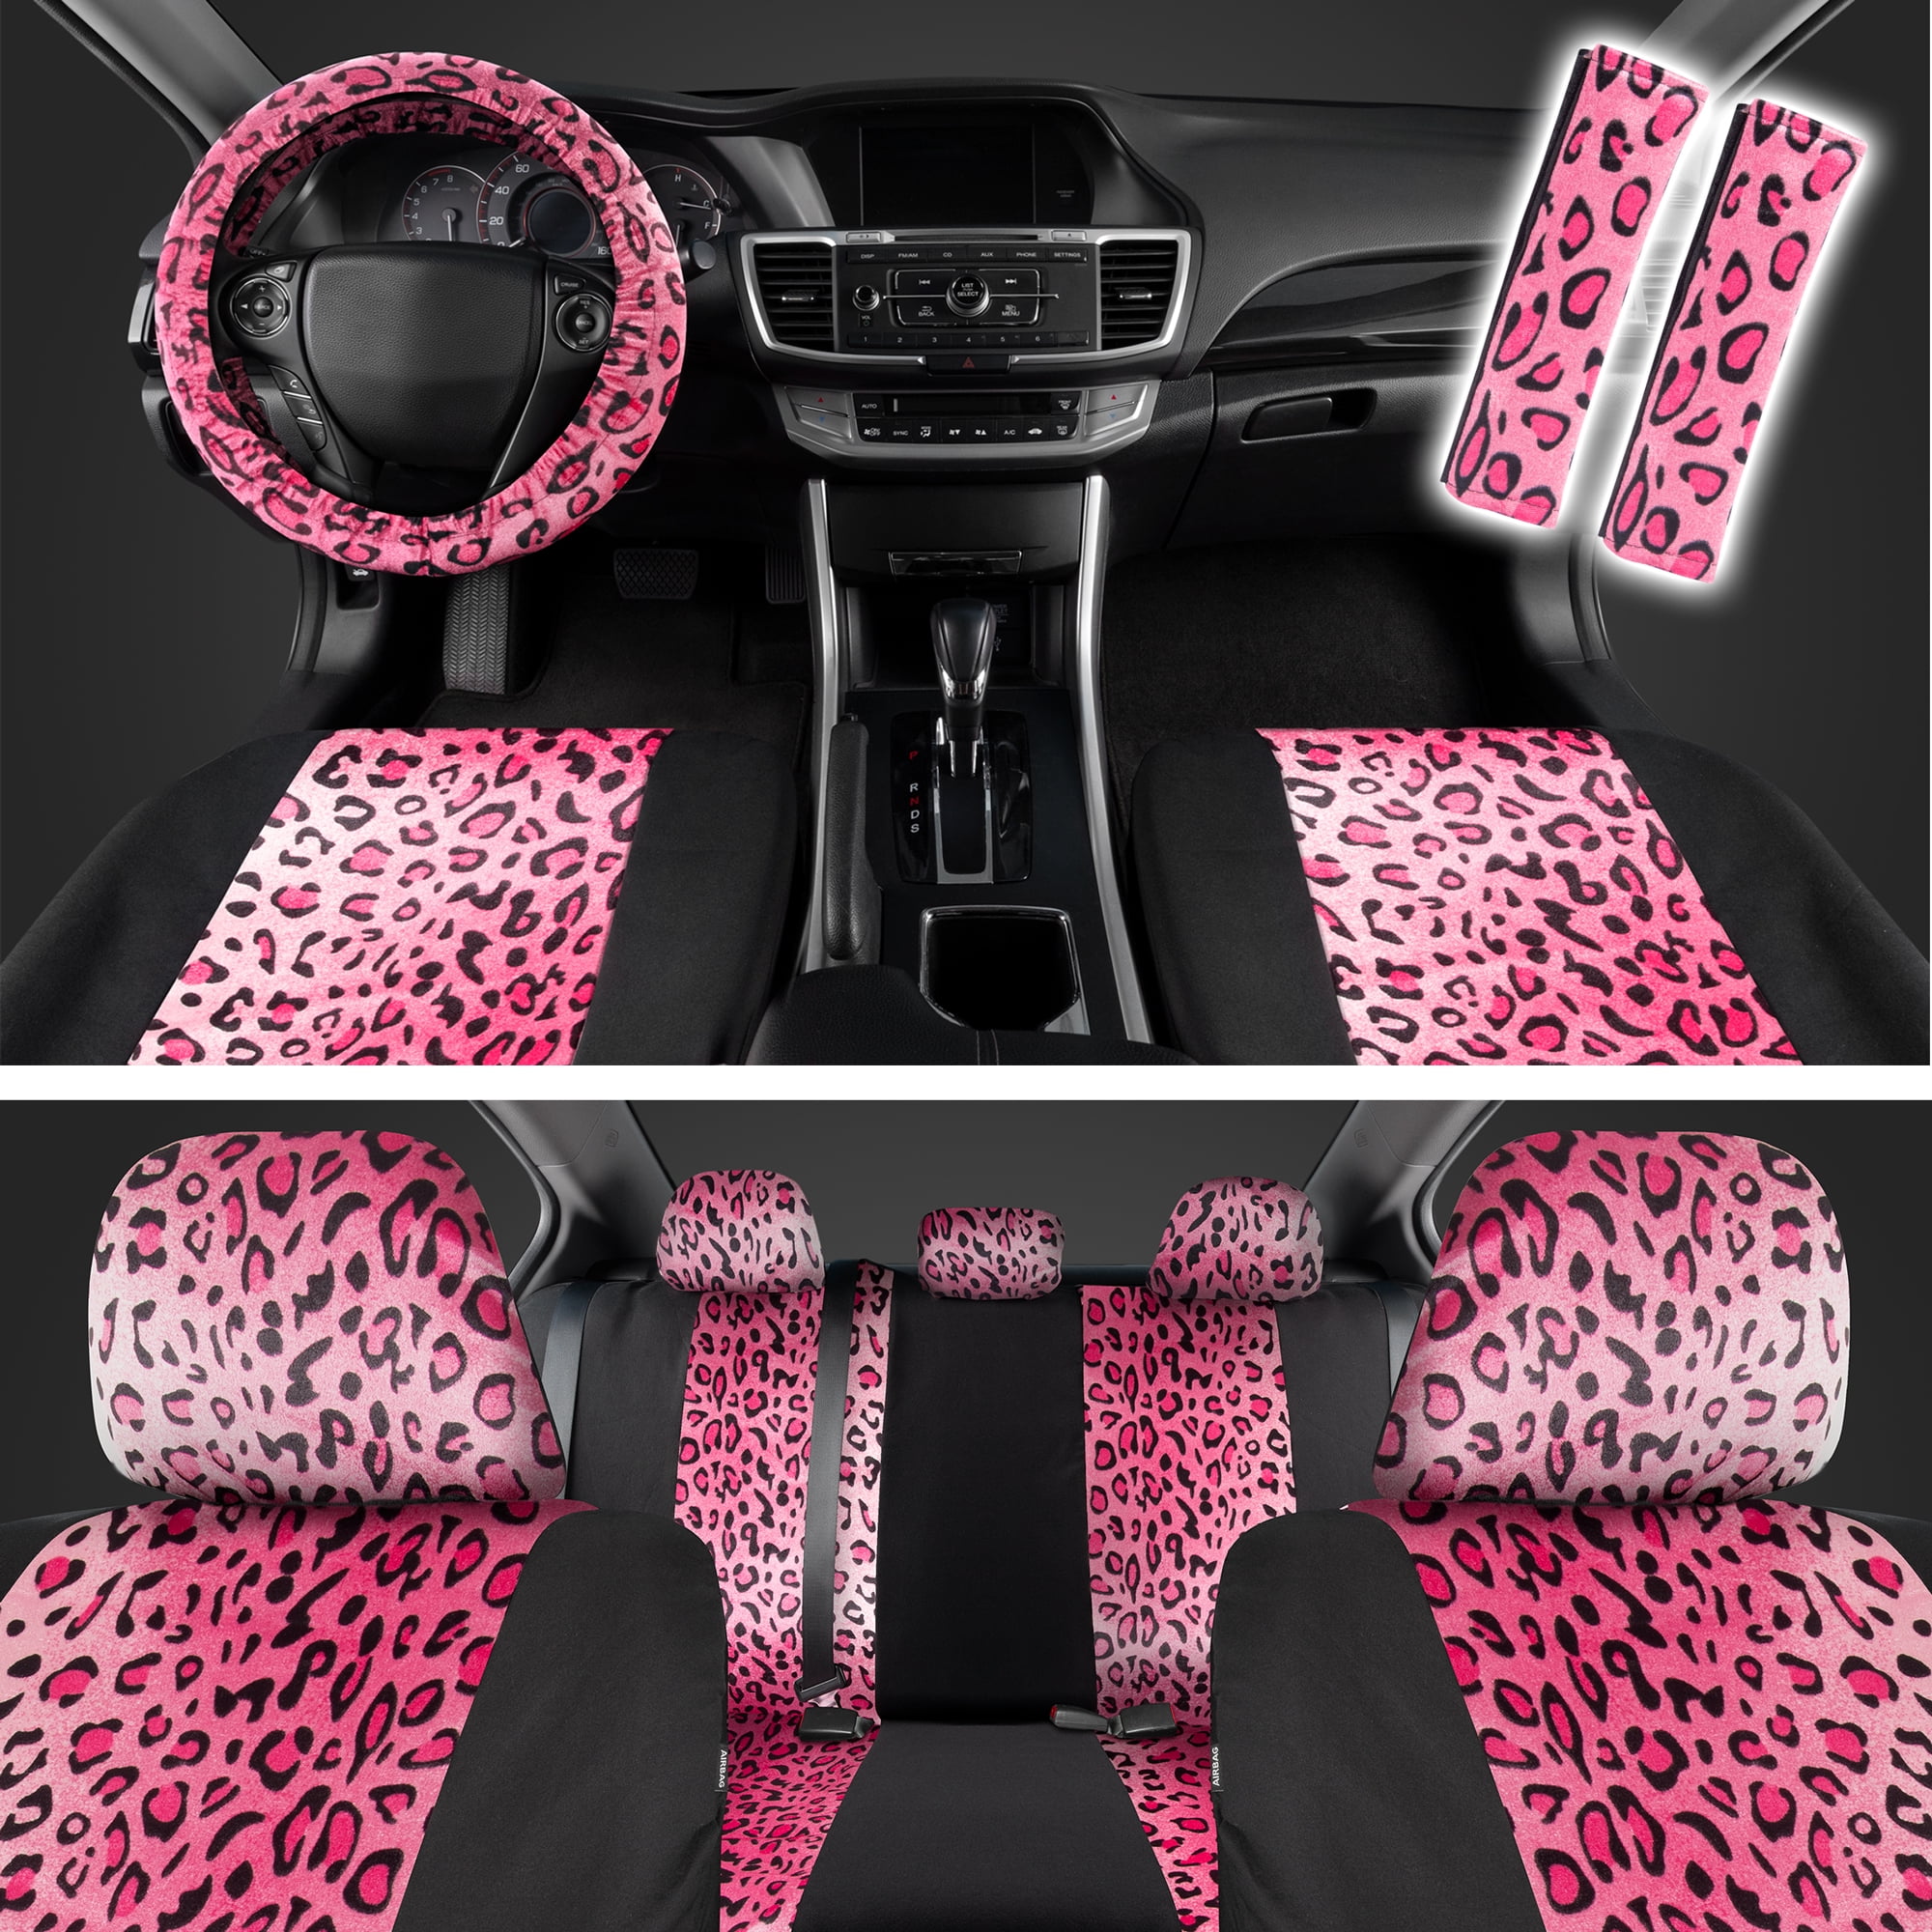 PINK car Leather look seat cover set FREE wheel cover and seatbelt pads GIFT 